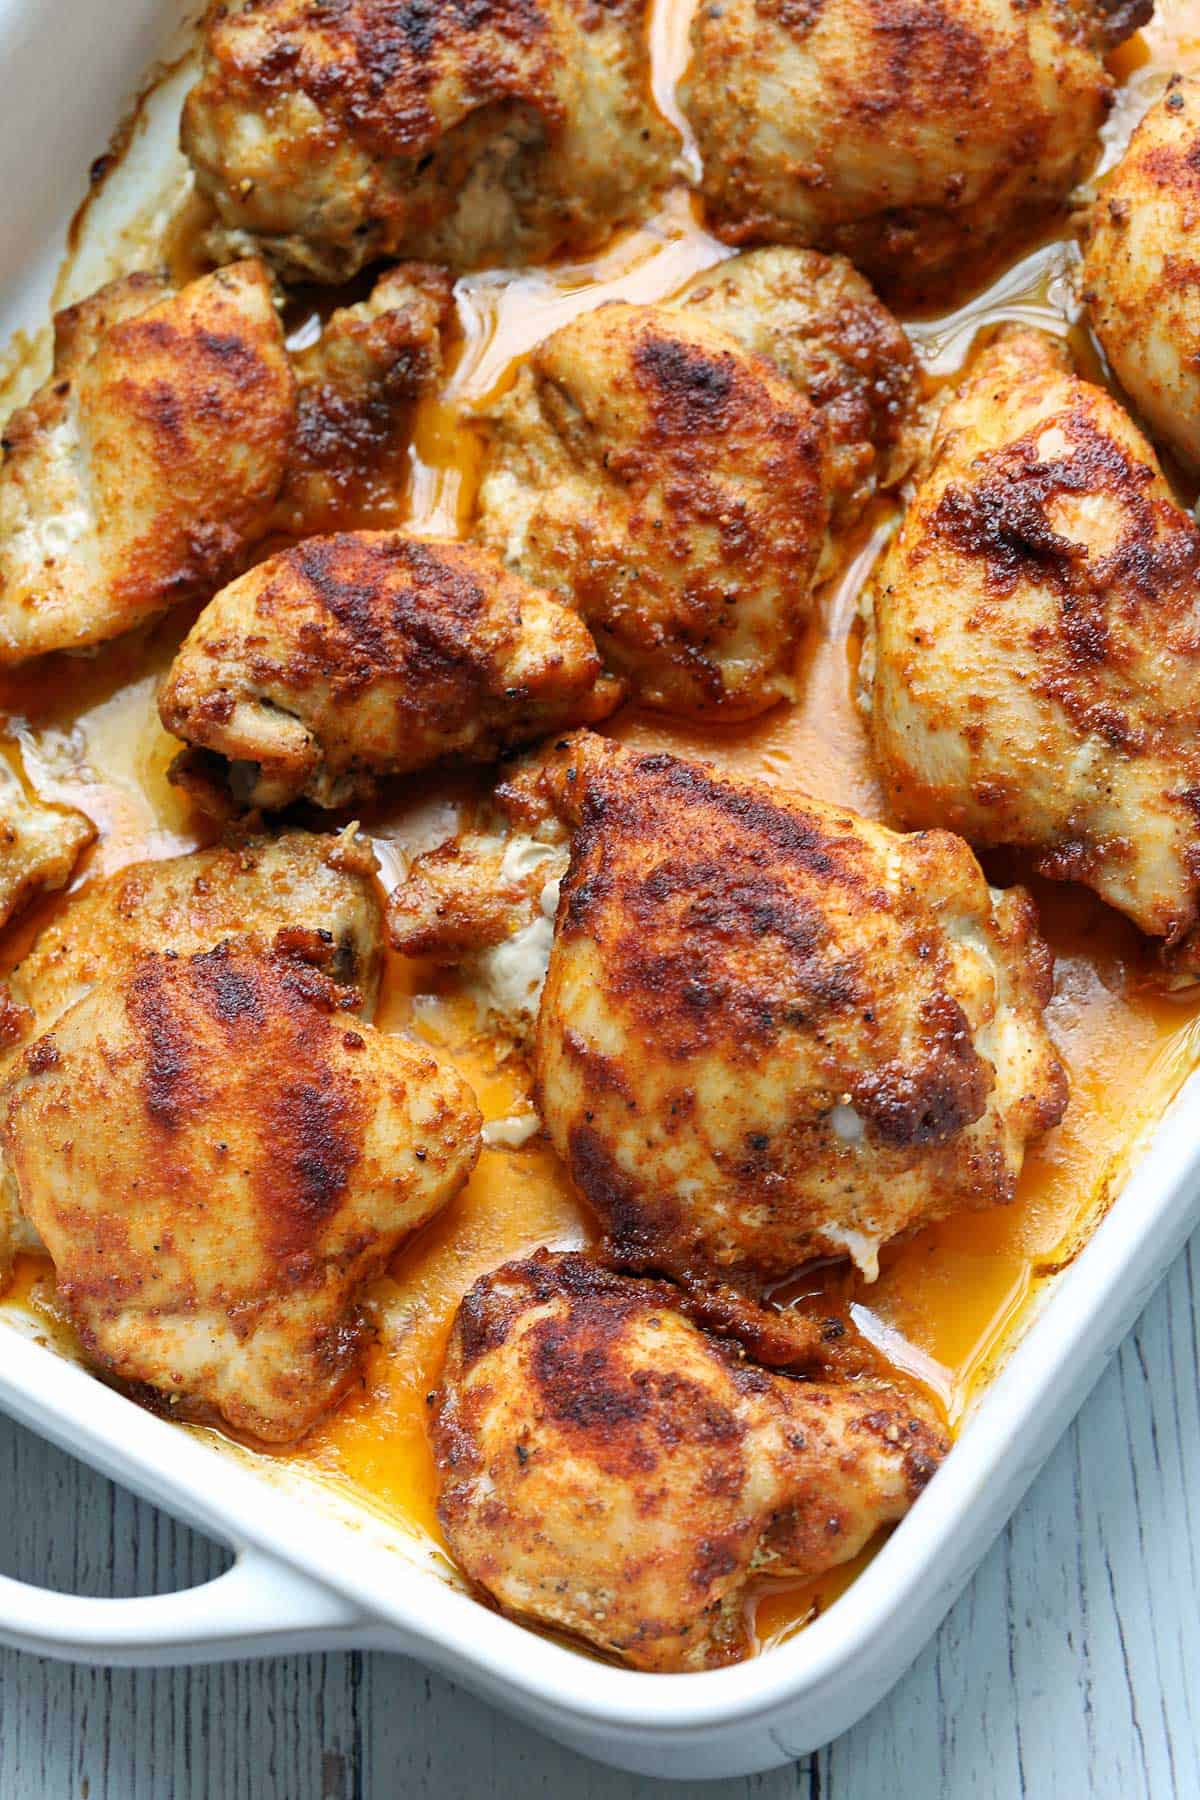 Baked boneless skinless chicken thighs in a baking dish.